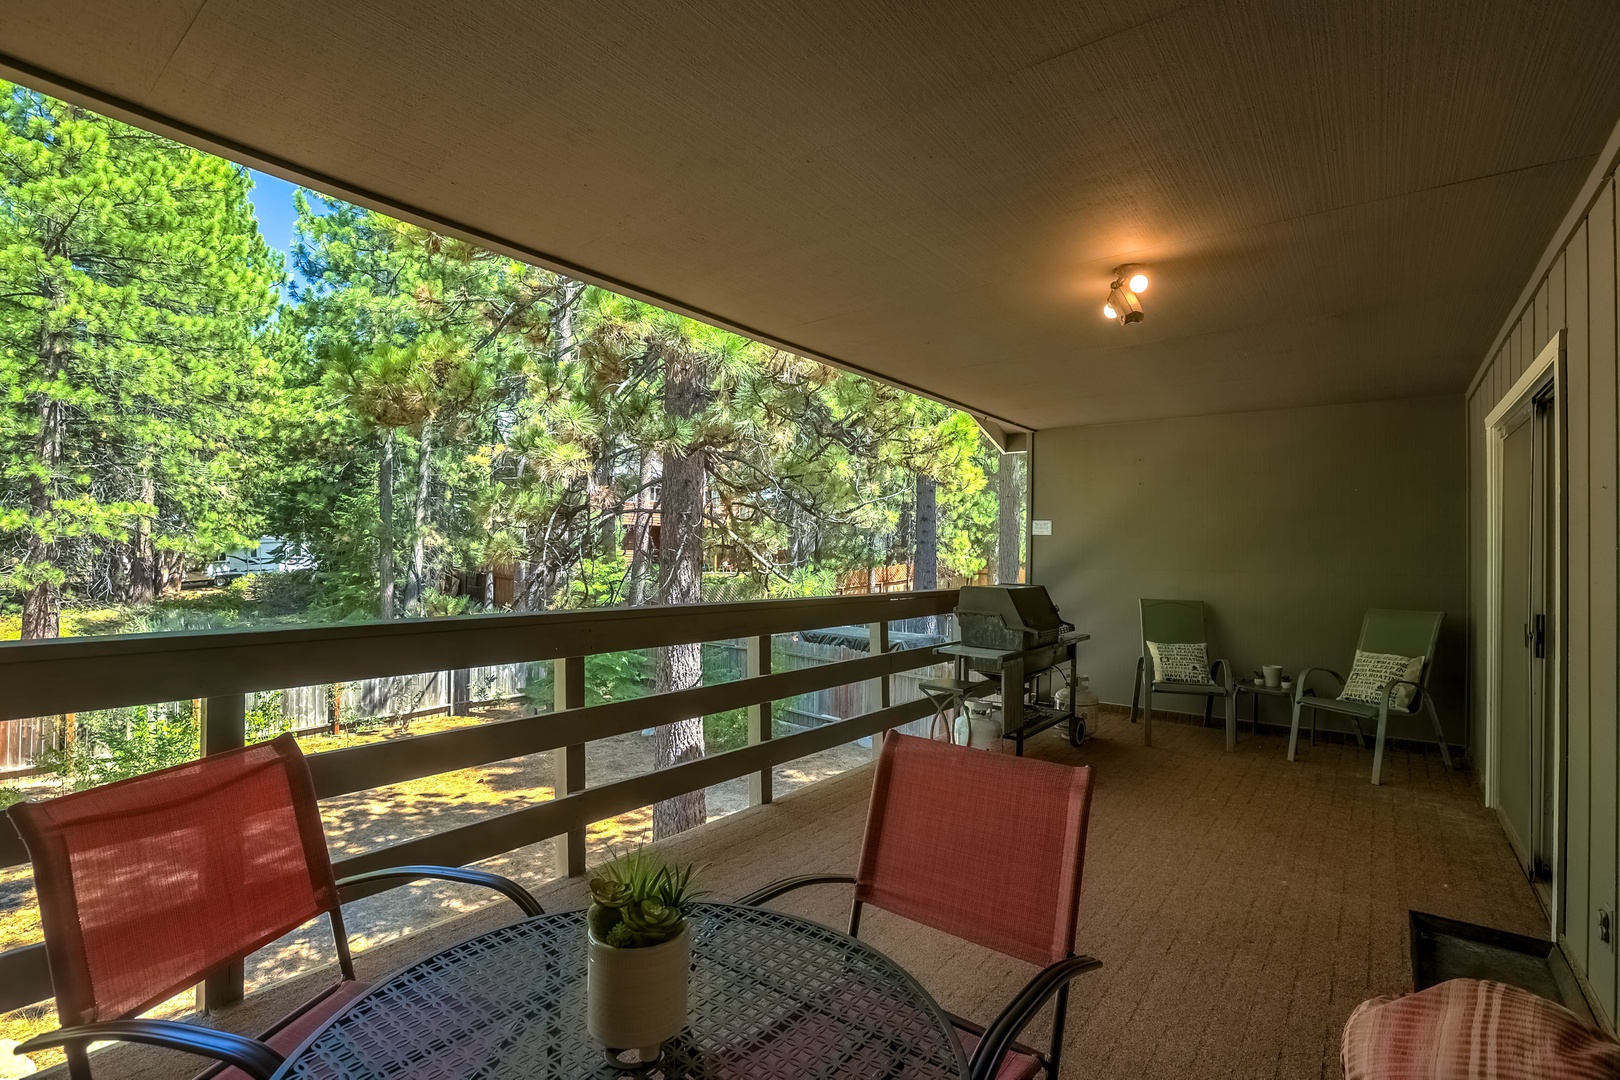 Lower balcony with BBQ and patio furniture